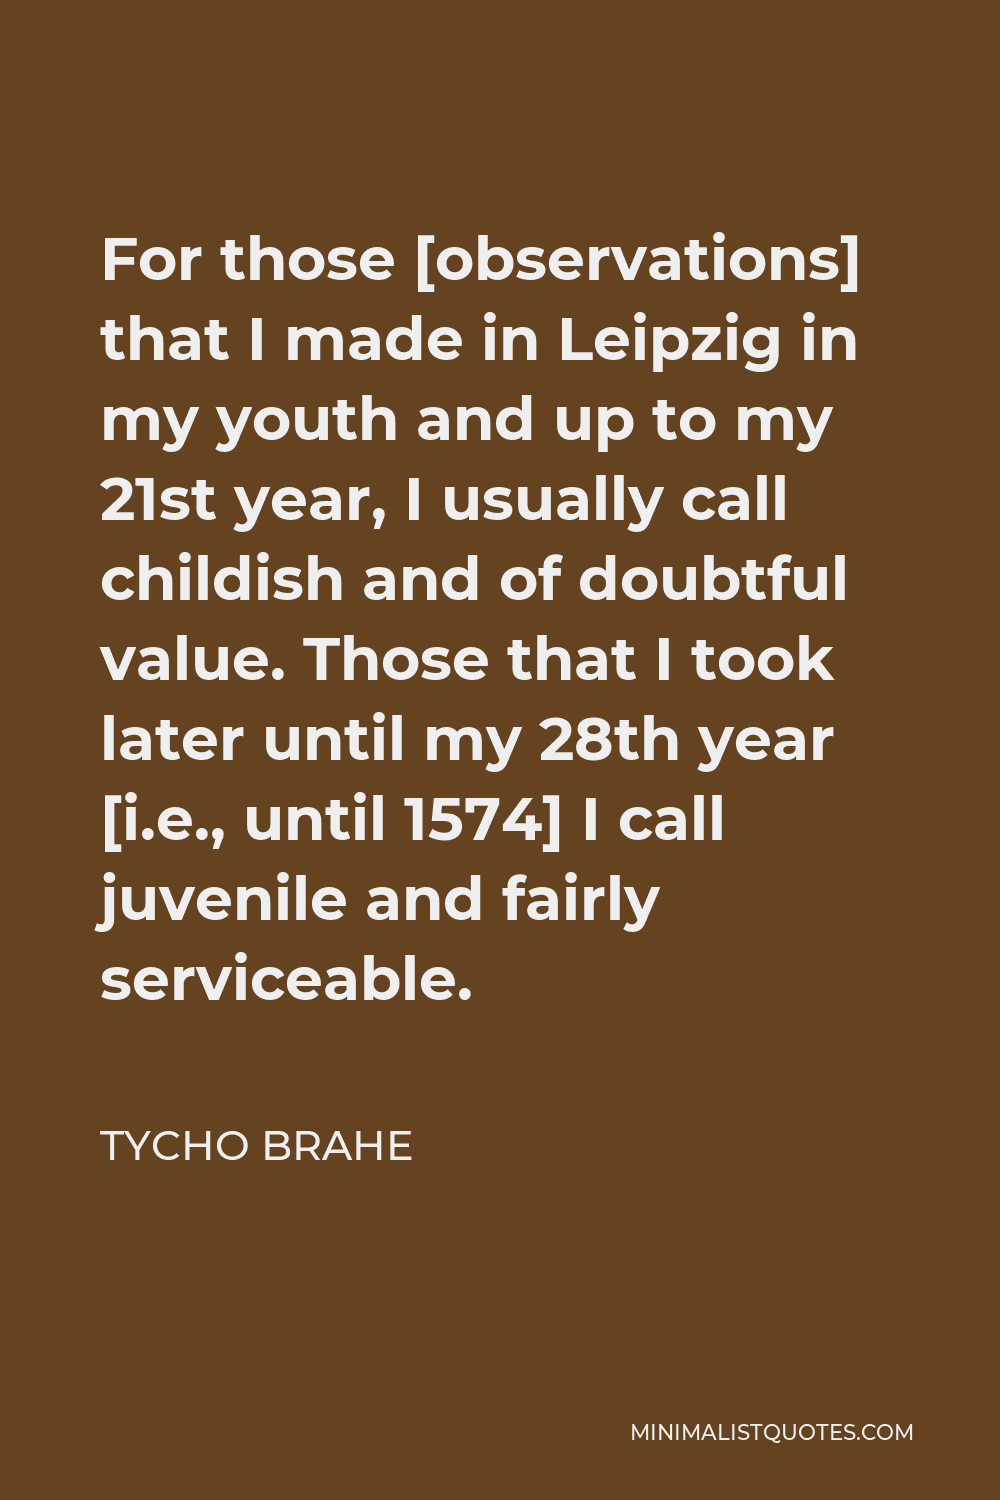 Tycho Brahe Quote - For those [observations] that I made in Leipzig in my youth and up to my 21st year, I usually call childish and of doubtful value. Those that I took later until my 28th year [i.e., until 1574] I call juvenile and fairly serviceable.